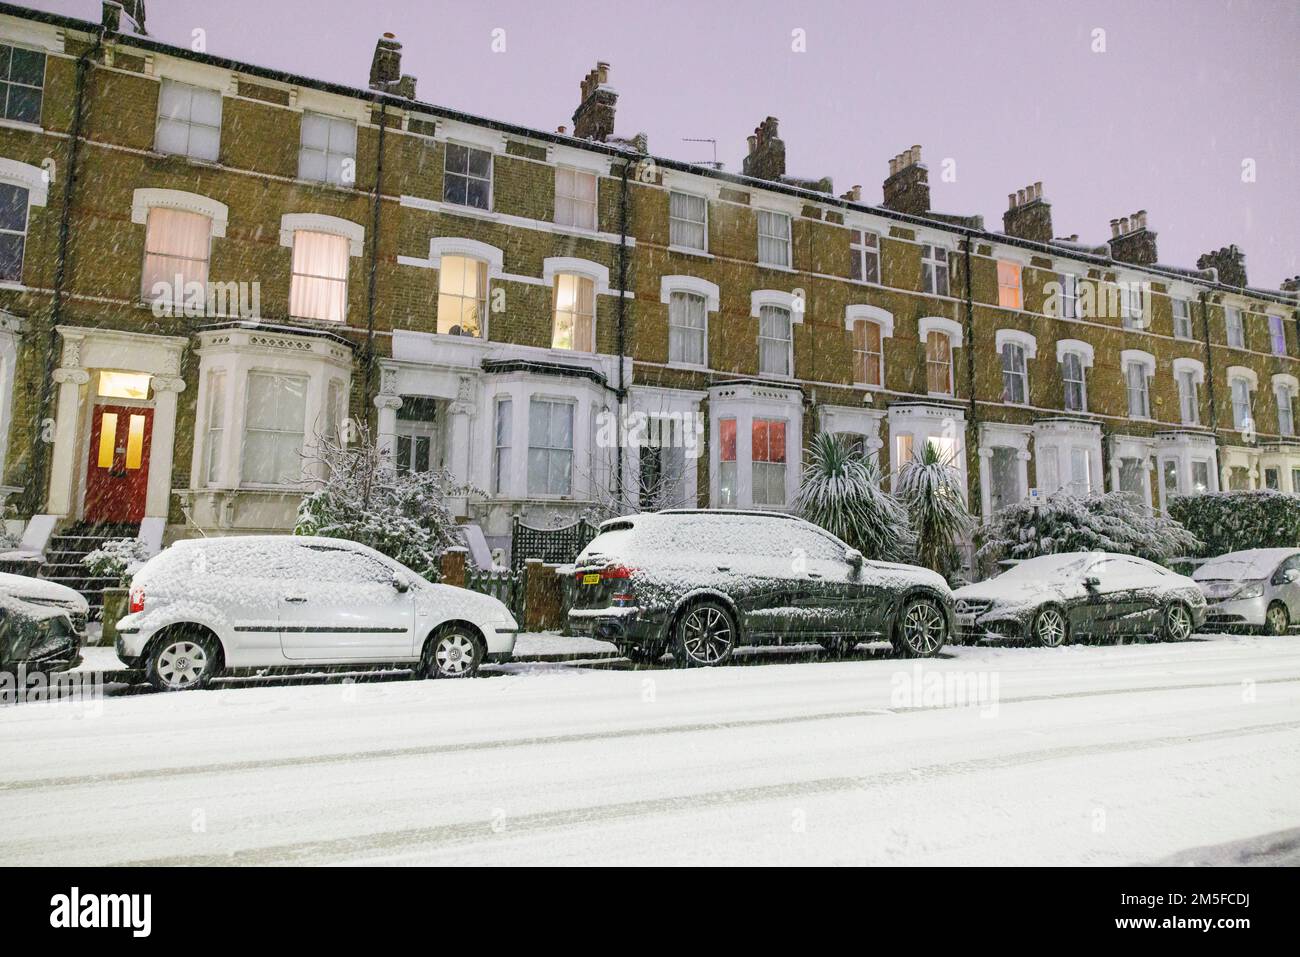 Snow falls on cars parked in Stockwell, South West London, as an un-forecast cold snap covers the capital and much of the south east of England with a Stock Photo